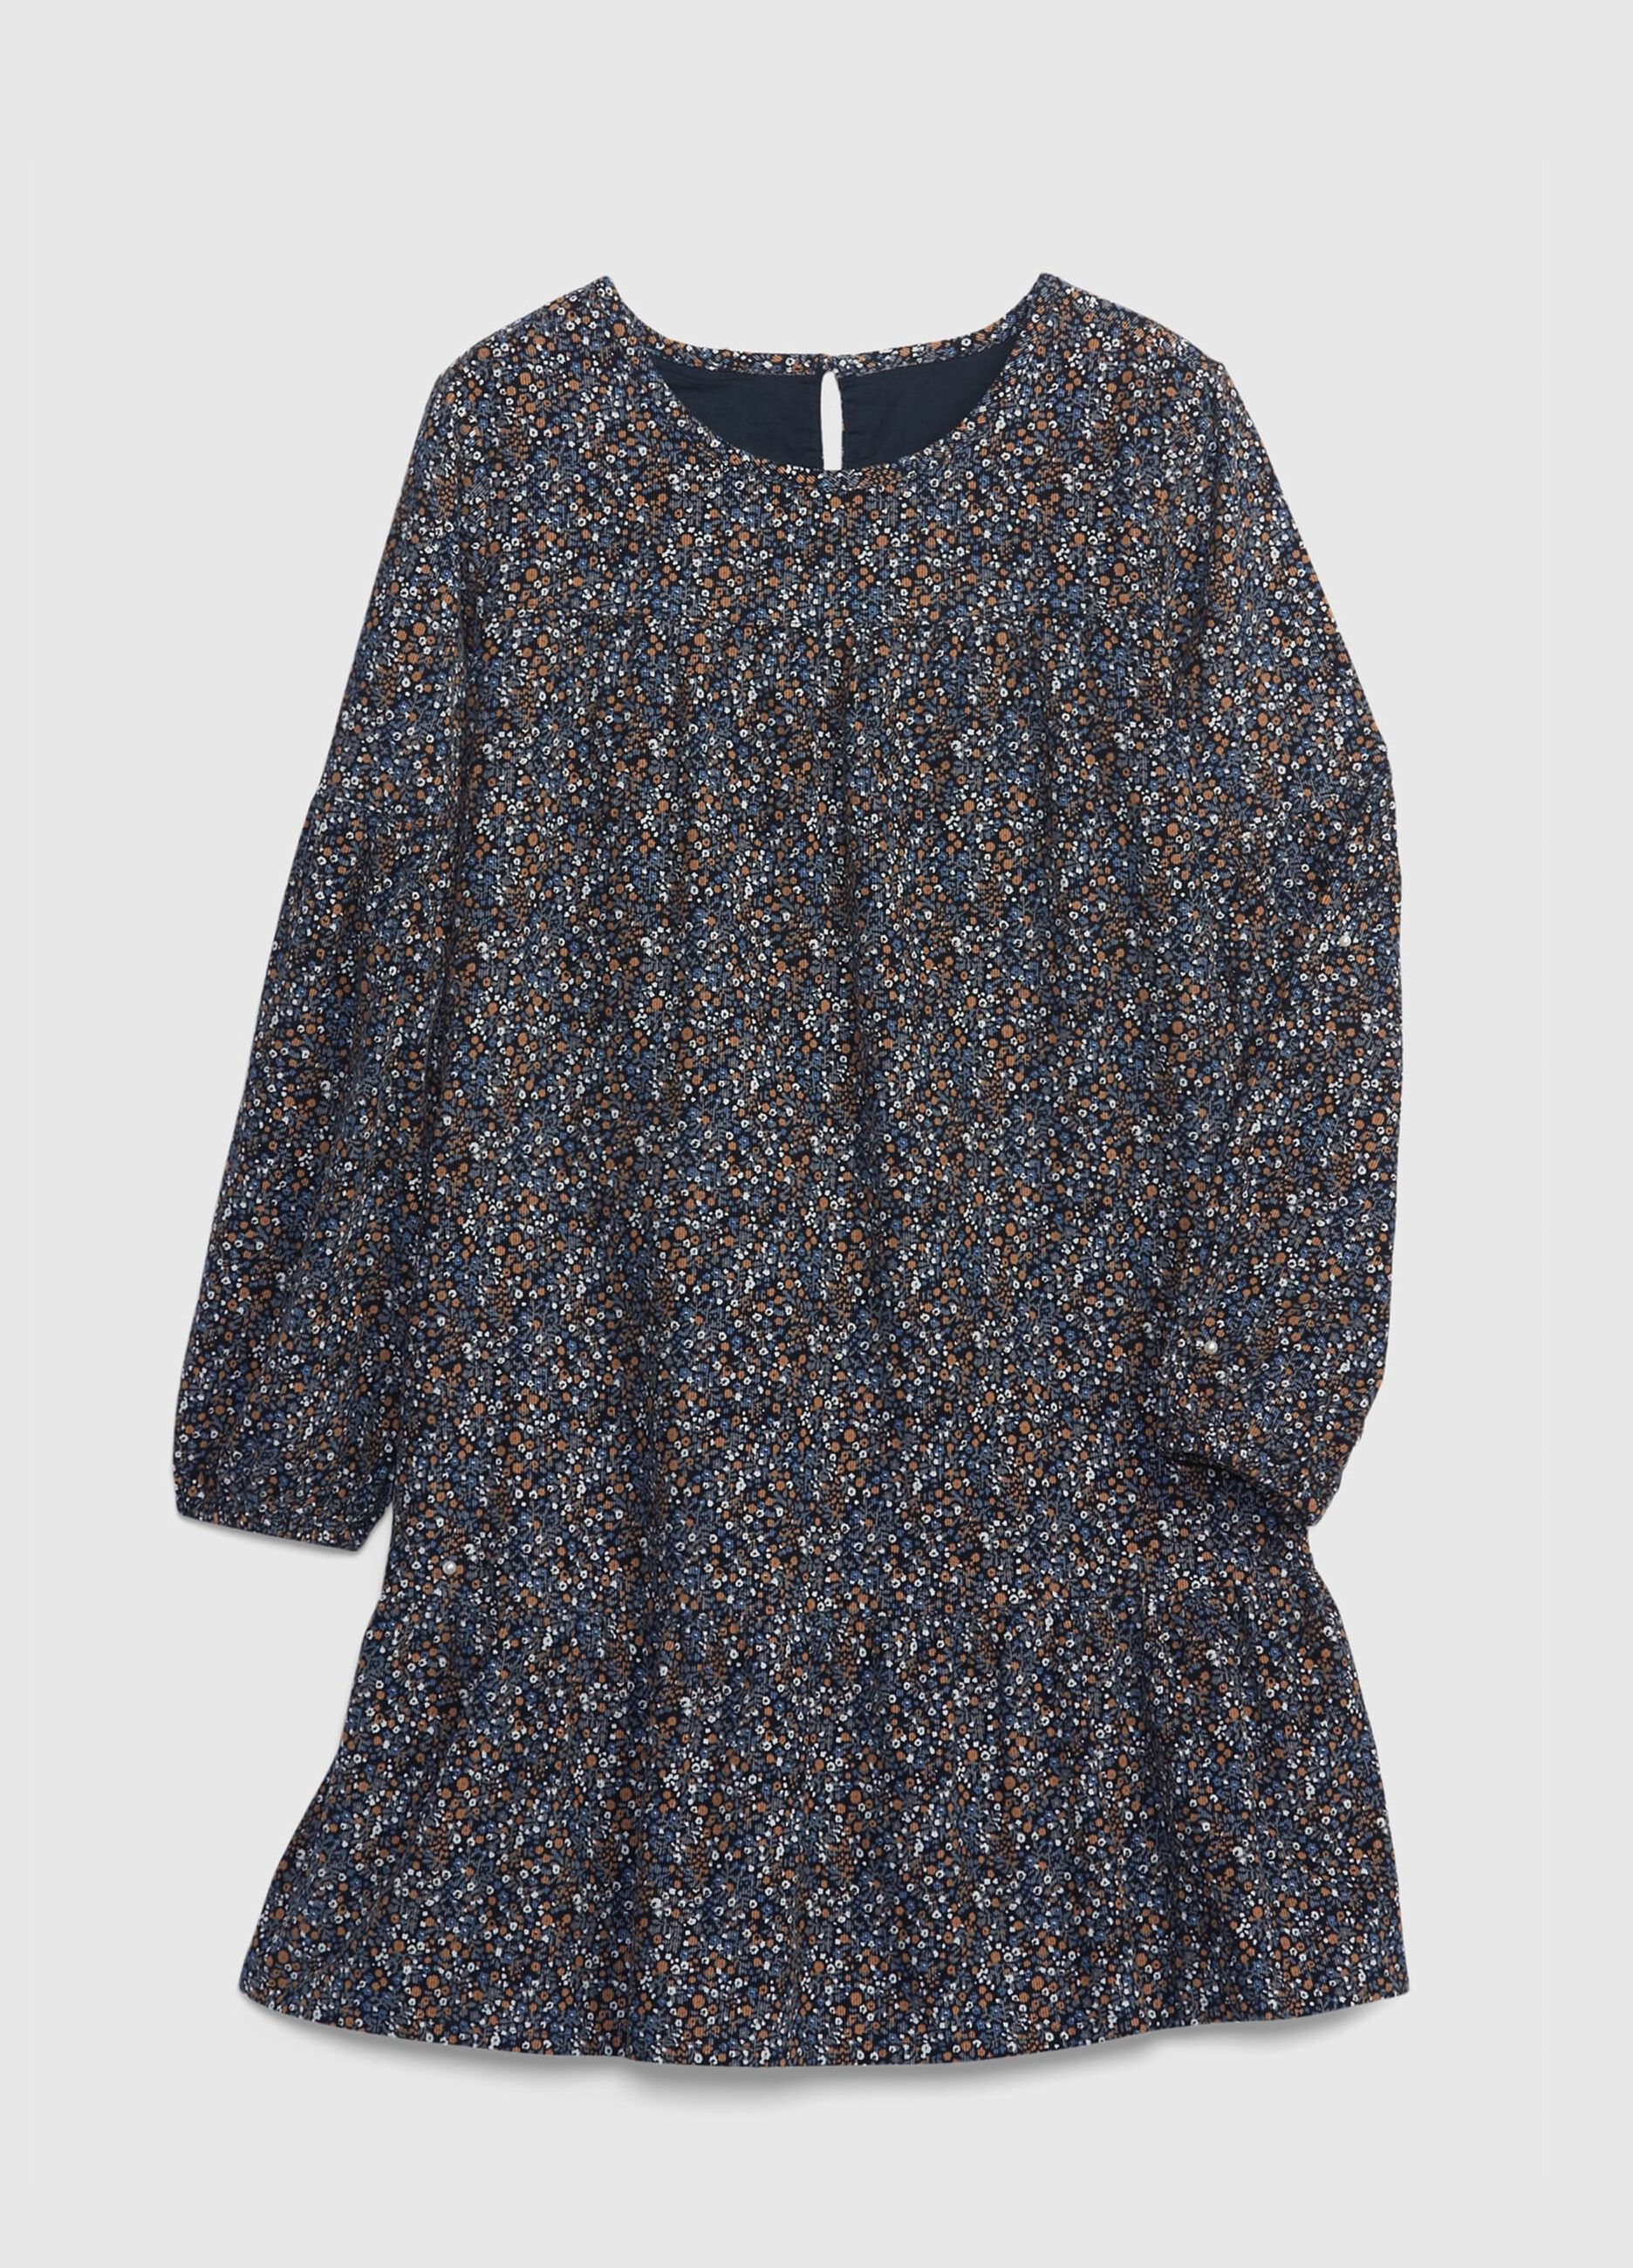 Corduroy dress with small flowers